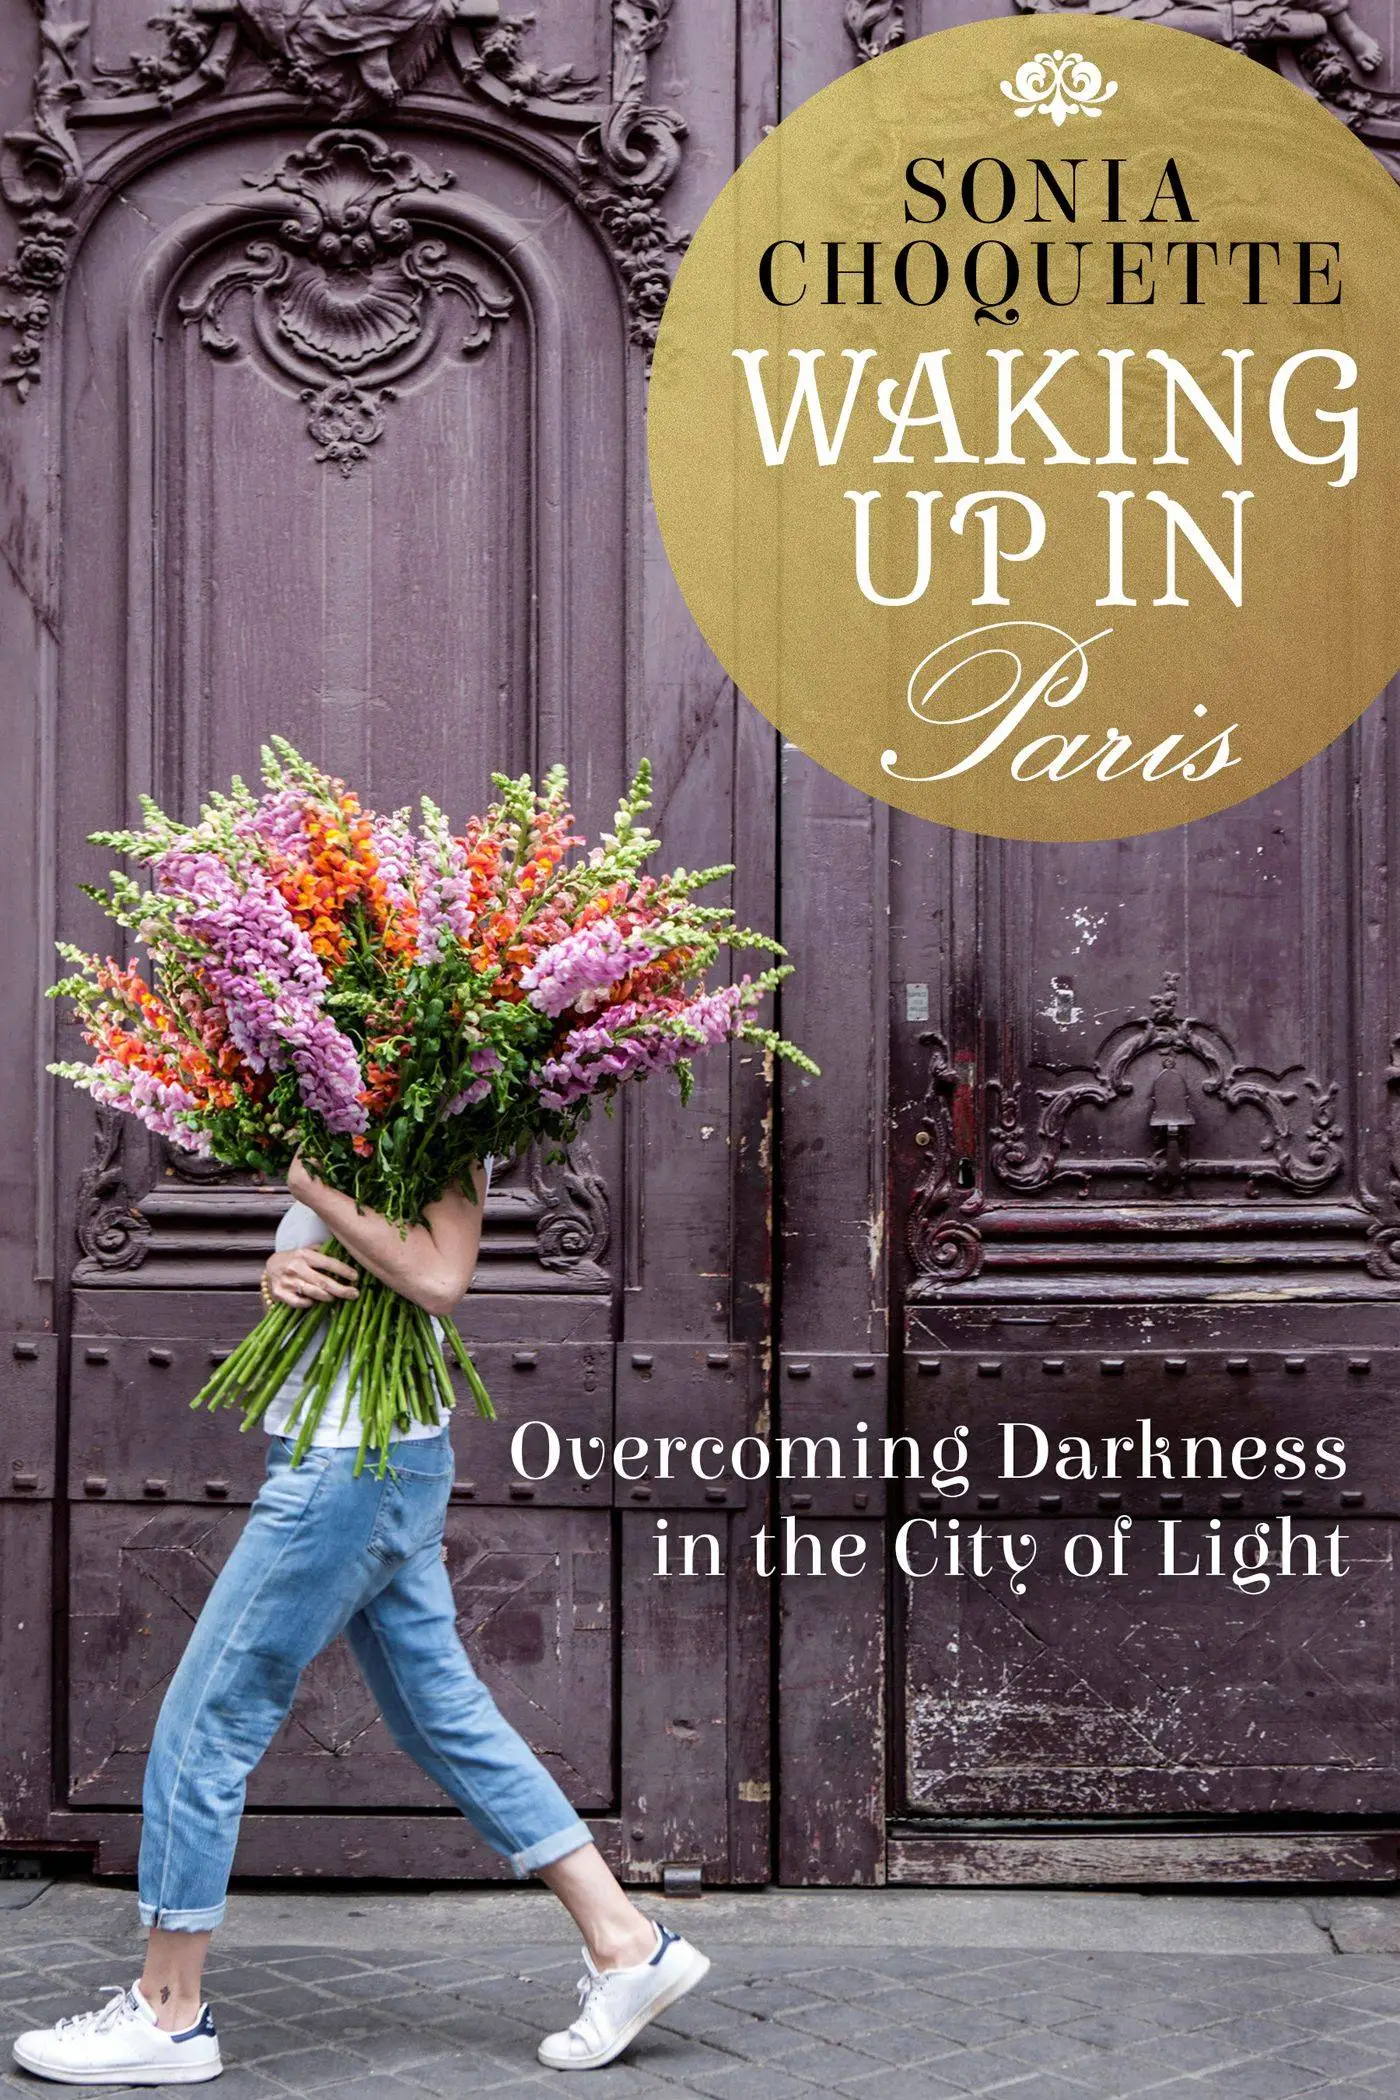 Waking Up in Paris Overcoming Darkness in the City of Light Epub-Ebook